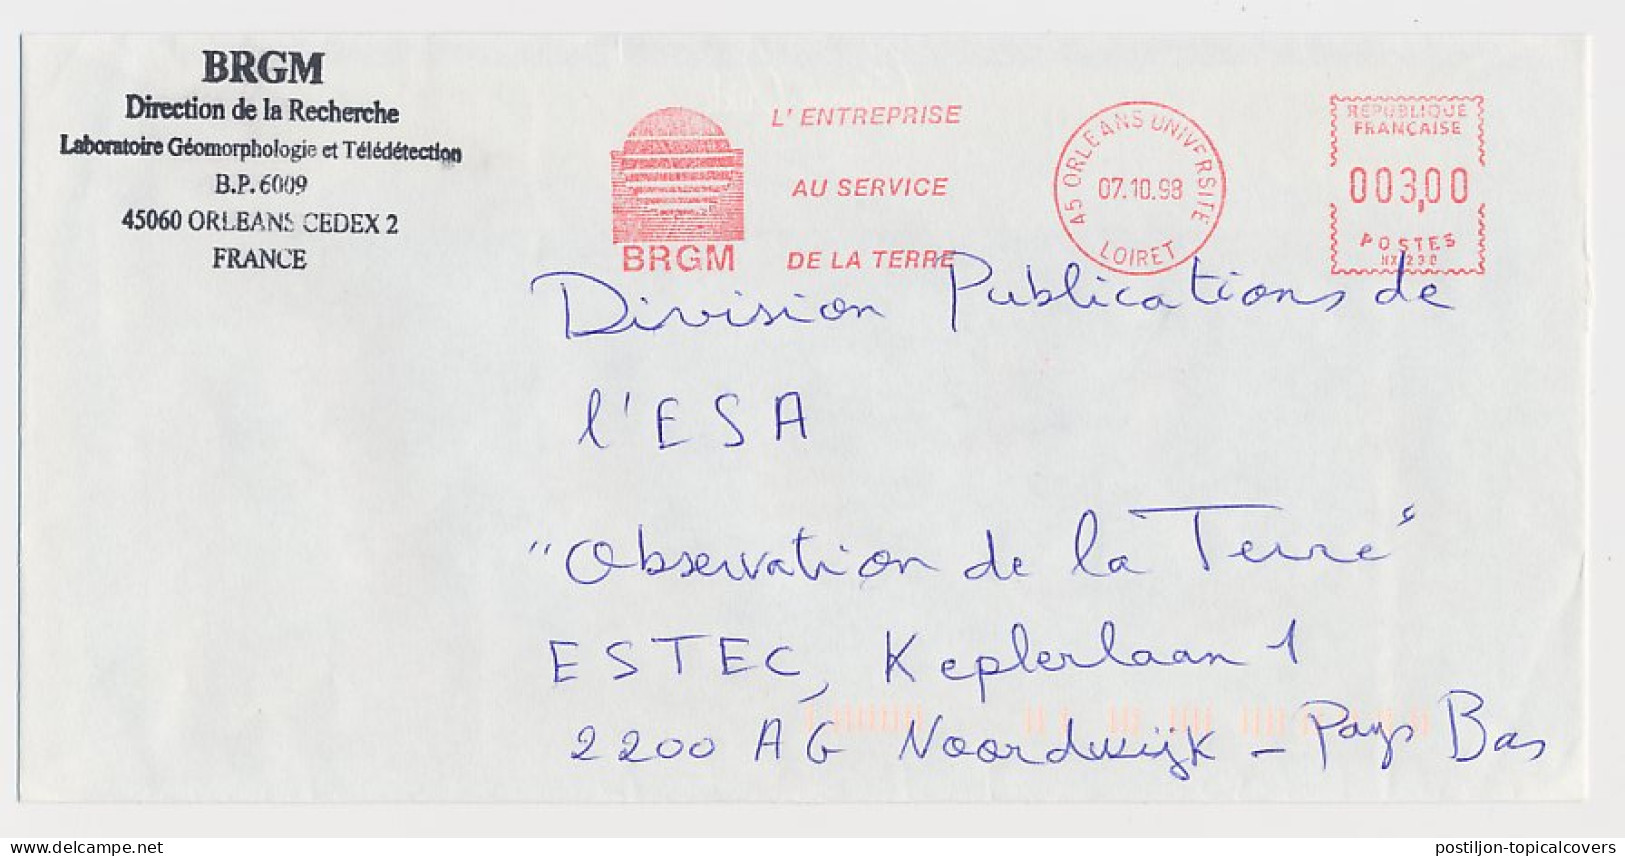 Meter Cover France 1998 BRGM - Research Laboratory Geomorphology And Teledetection - Astronomy